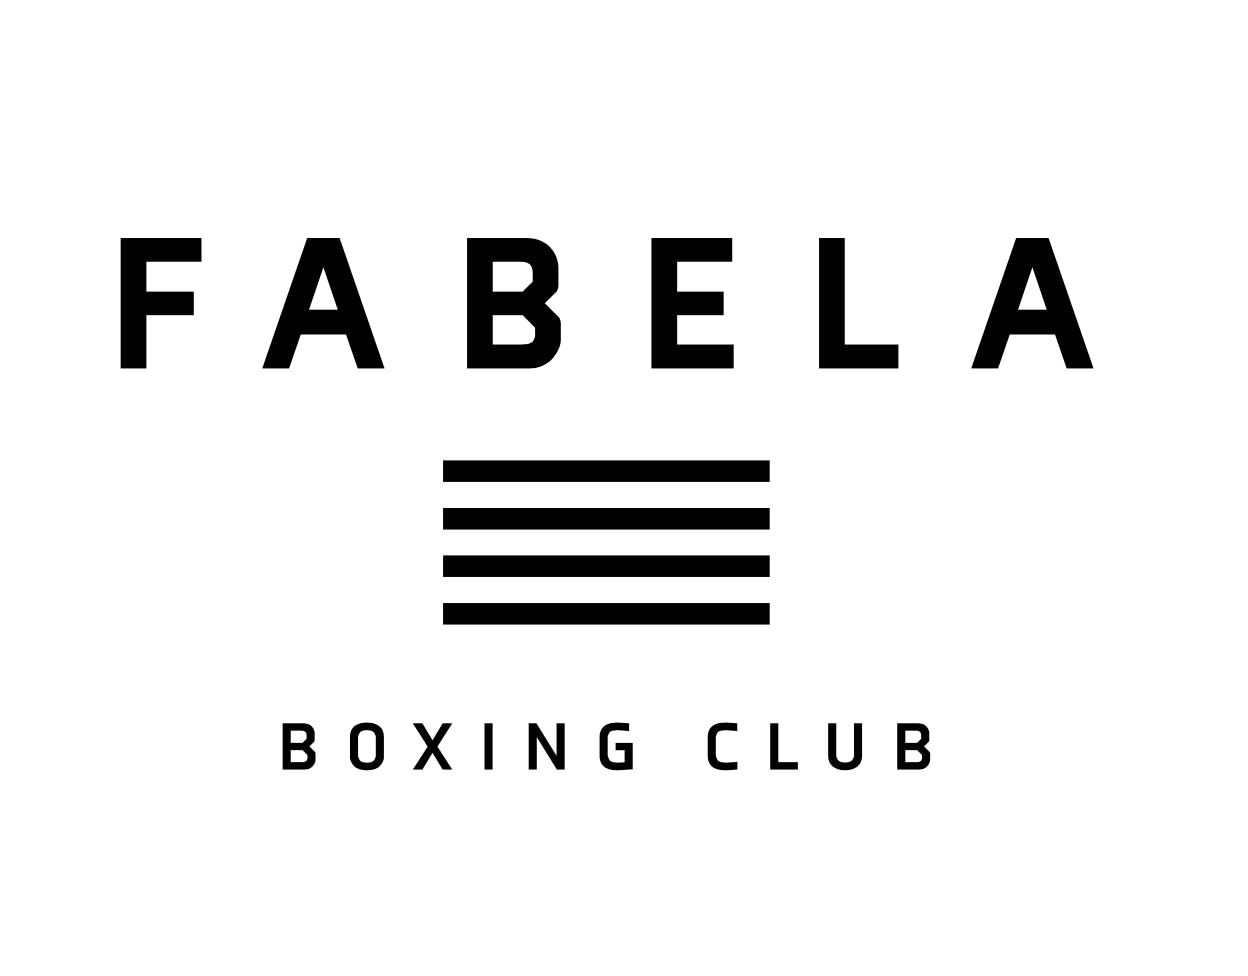 Limited collaboration with Fabela Boxing Club.